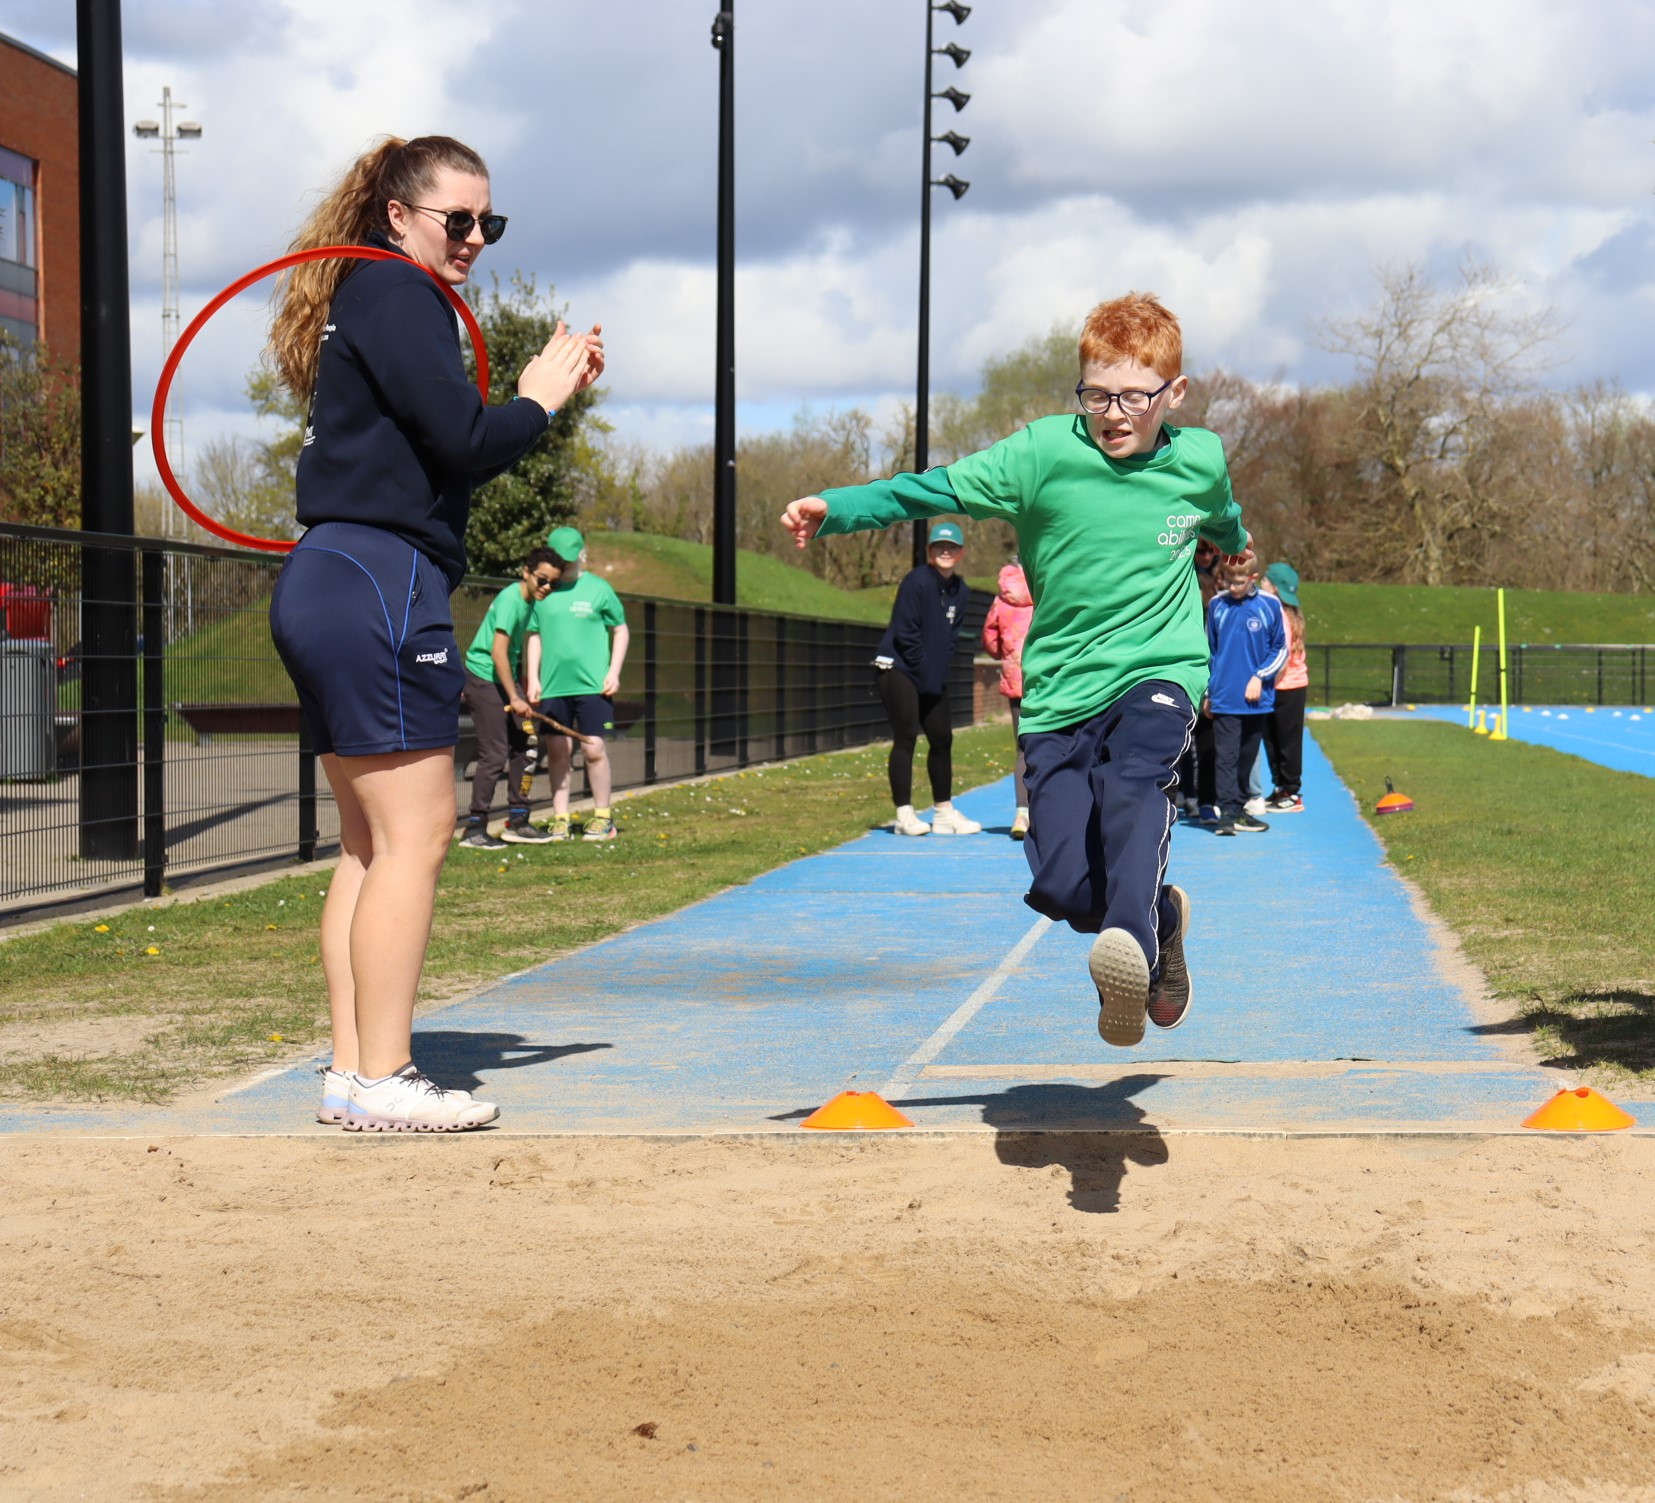 Female Coach claps as young red haired boy completes long jump on a blue running track into yellow sand.